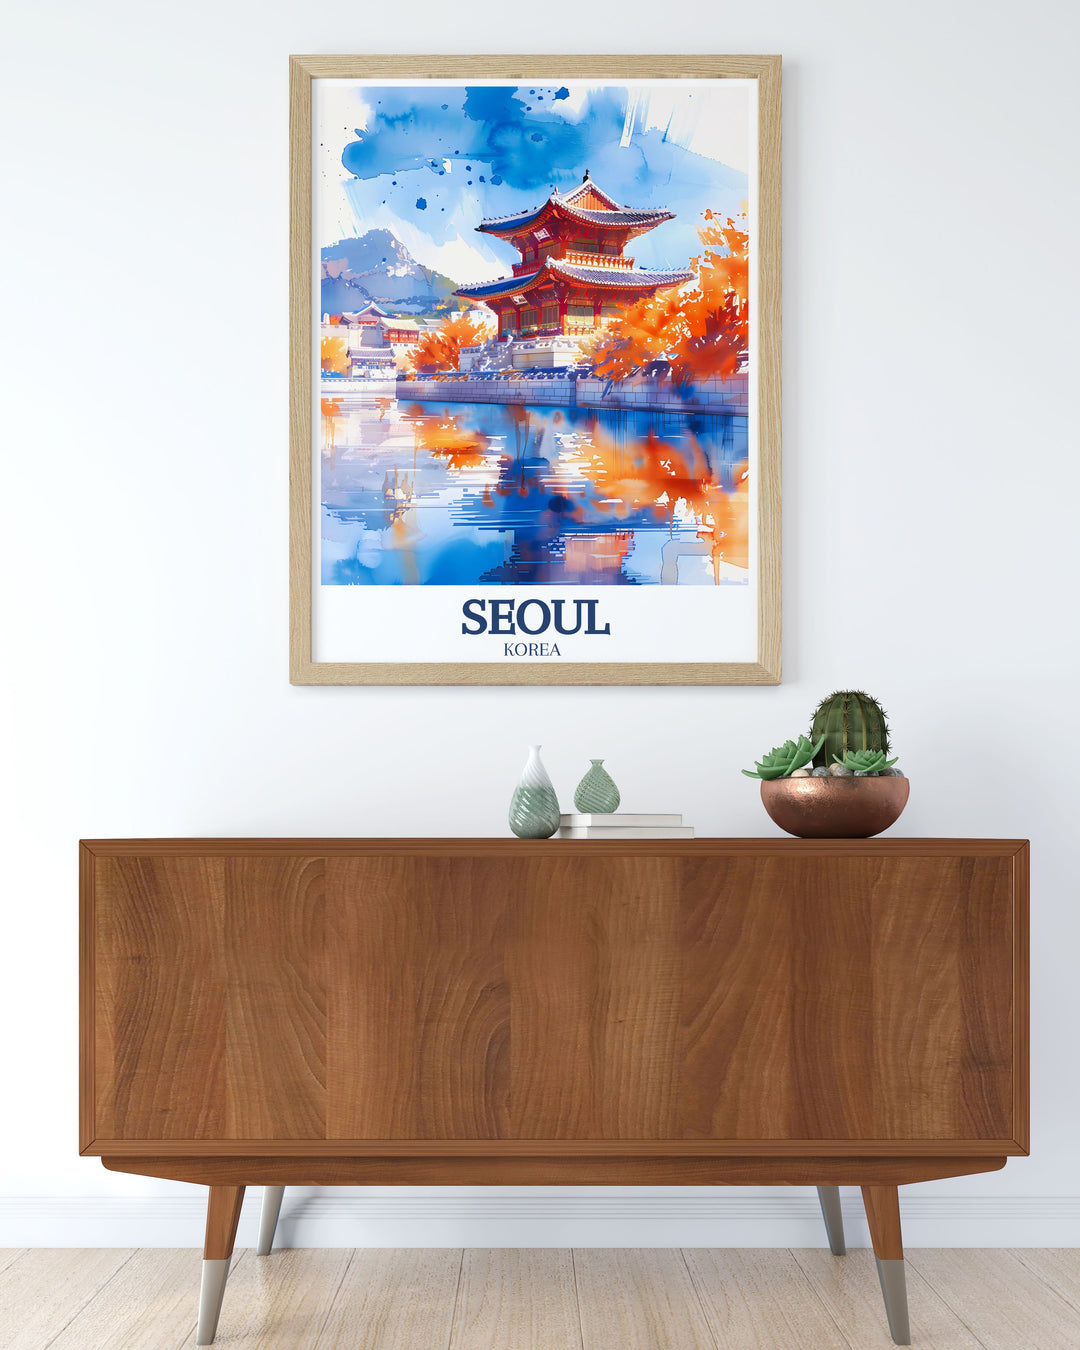 Stunning Seoul Art Print showcasing Gyeongbokgung Palace and Han River perfect for adding a touch of South Korean heritage to your home decor ideal for anniversary gifts birthday gifts and Christmas gifts a stylish addition to any living space